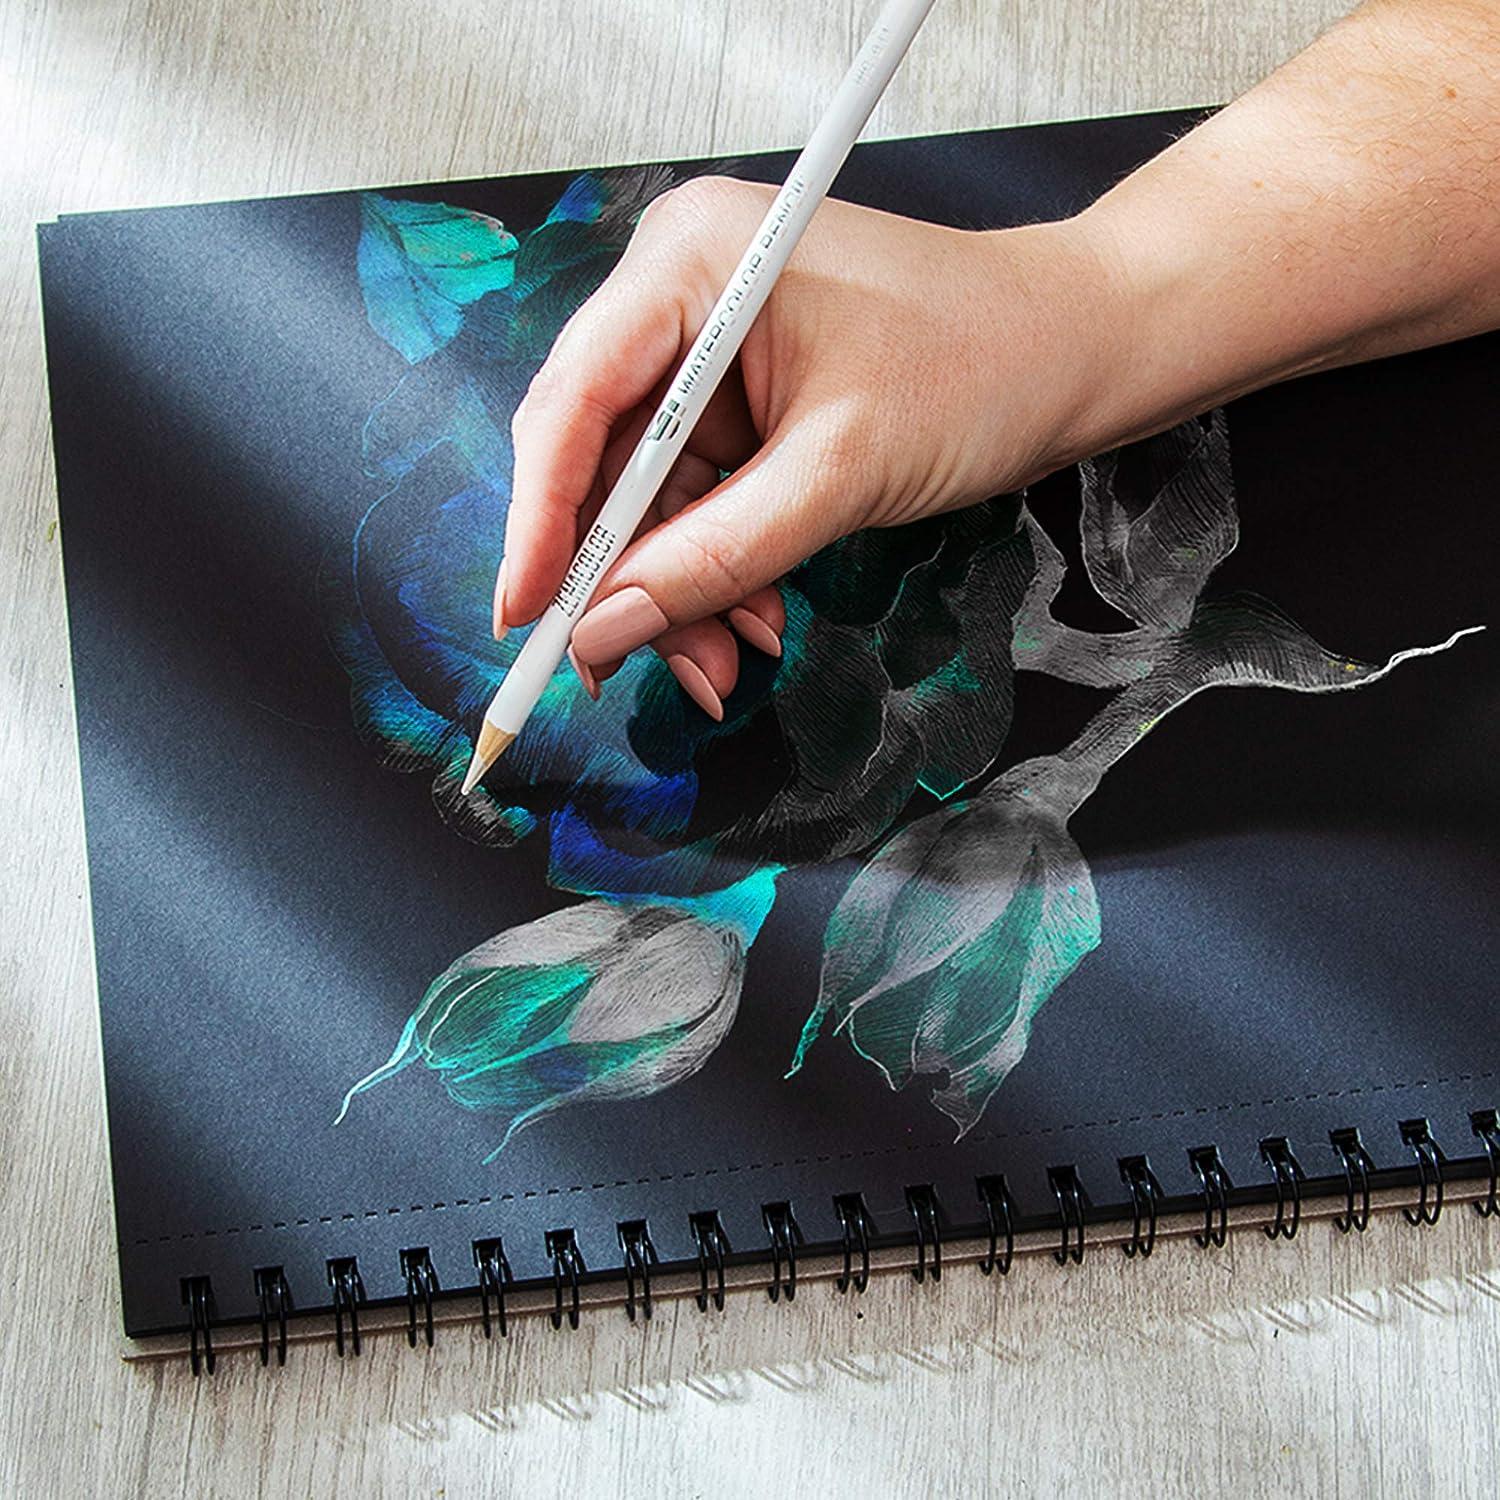 25 Sheet A4/A5 Black Paper Cardboard Notebook, Art Marker Sketch pad Book  For Paiting Drawing Easy to color oil painting